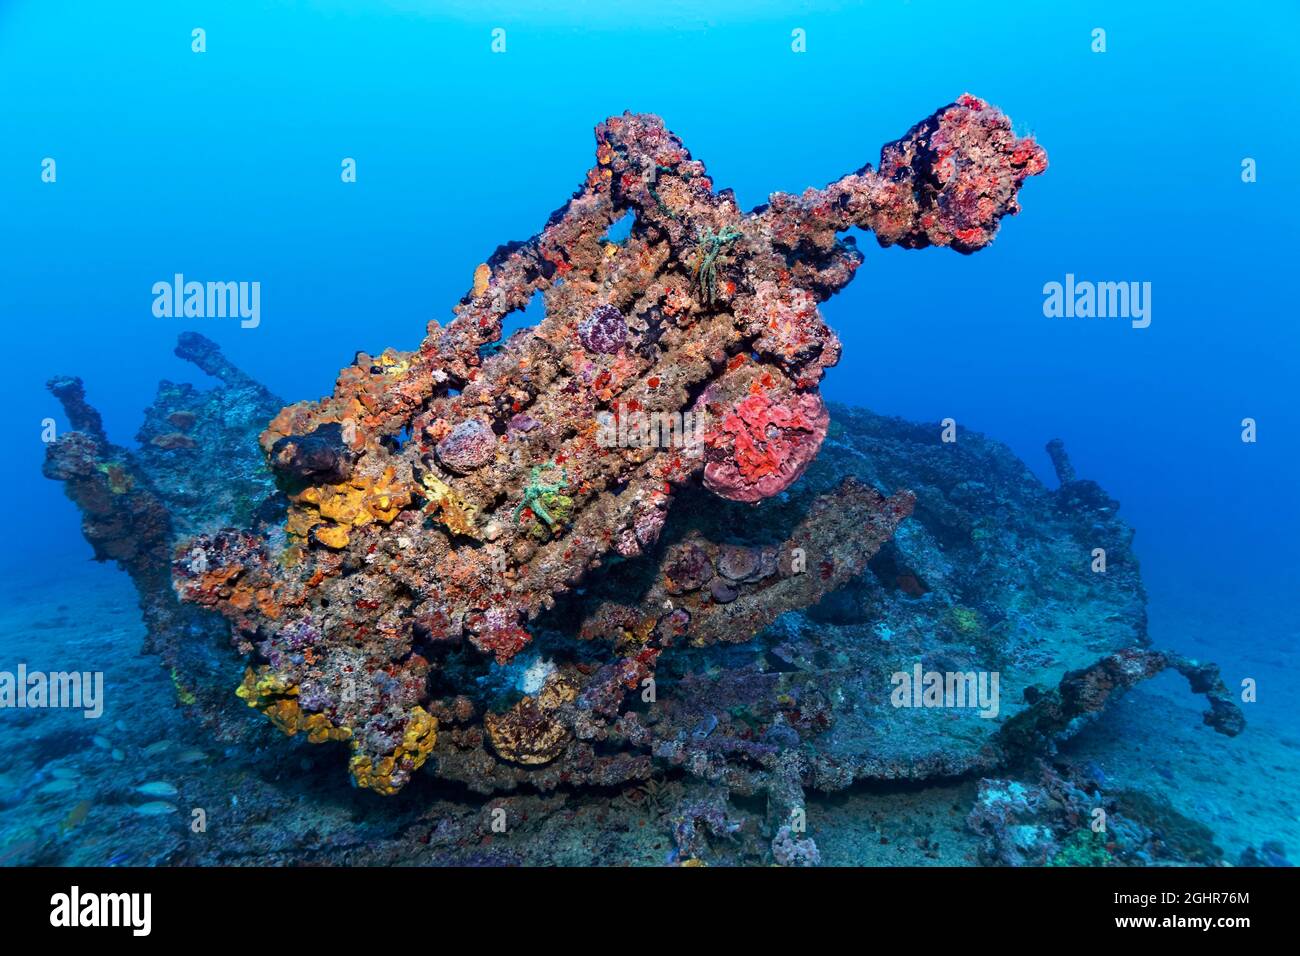 Wreckage and dinghy thickly encrusted with various sponges, tugboat, wreck, shipwreck, Virgen de Altagracia, Caribbean Sea near Playa St. Lucia Stock Photo